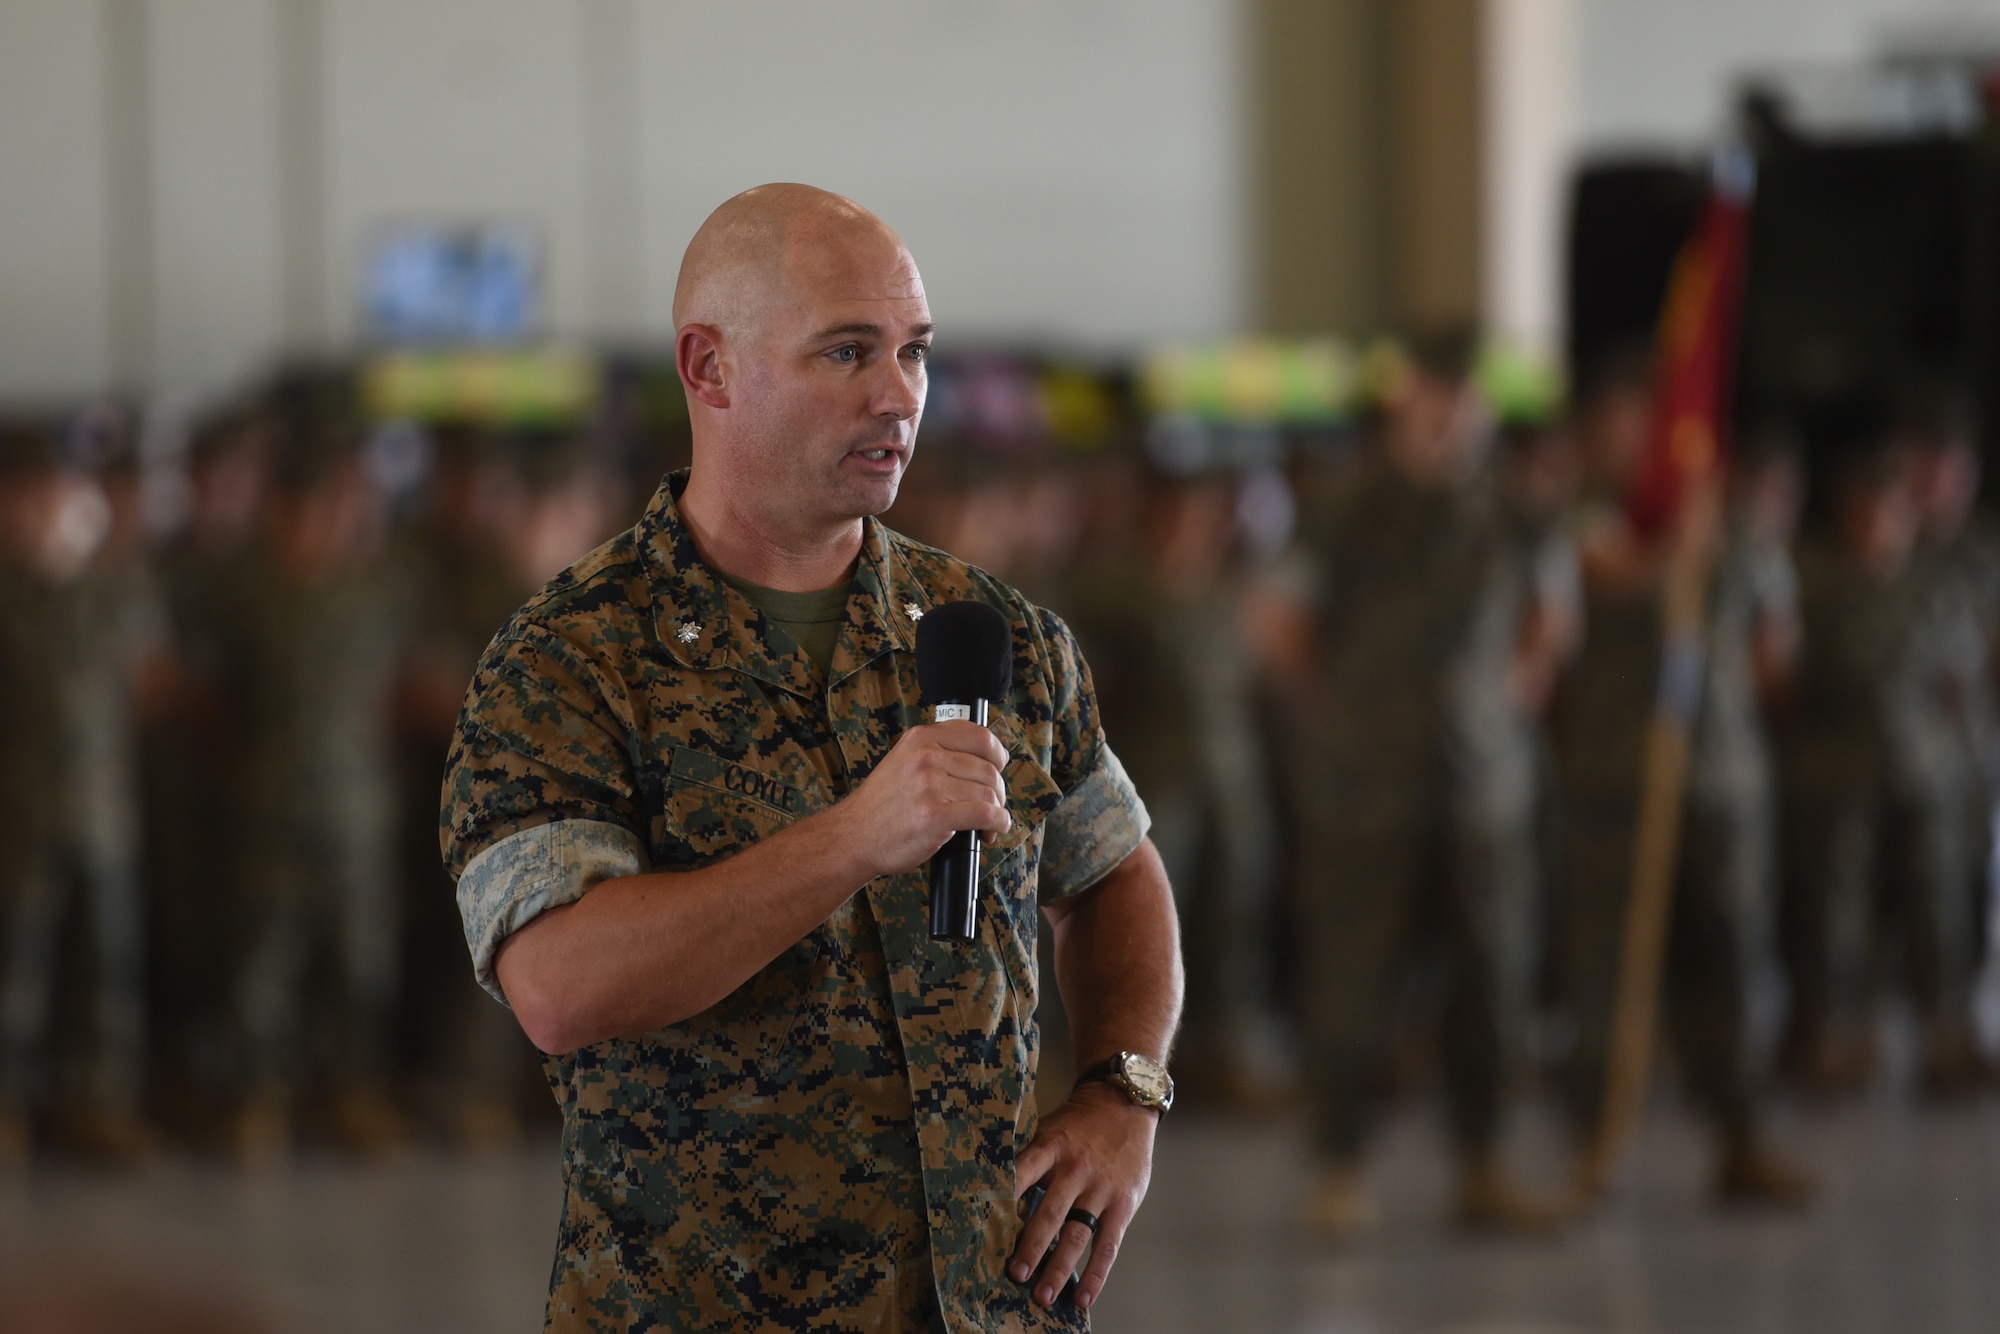 U.S. Marine Corps Lt. Col. Thomas Coyle, incoming Marine Corps Detachment commanding officer, speaks during the MCD change of command at Goodfellow Air Force Base, Texas, June 24, 2022. From 2020 to 2021, Coyle attended Marine Corps Command and Staff College, and earned a master’s degree in military studies. (U.S. Air Force photo by Senior Airman Abbey Rieves)